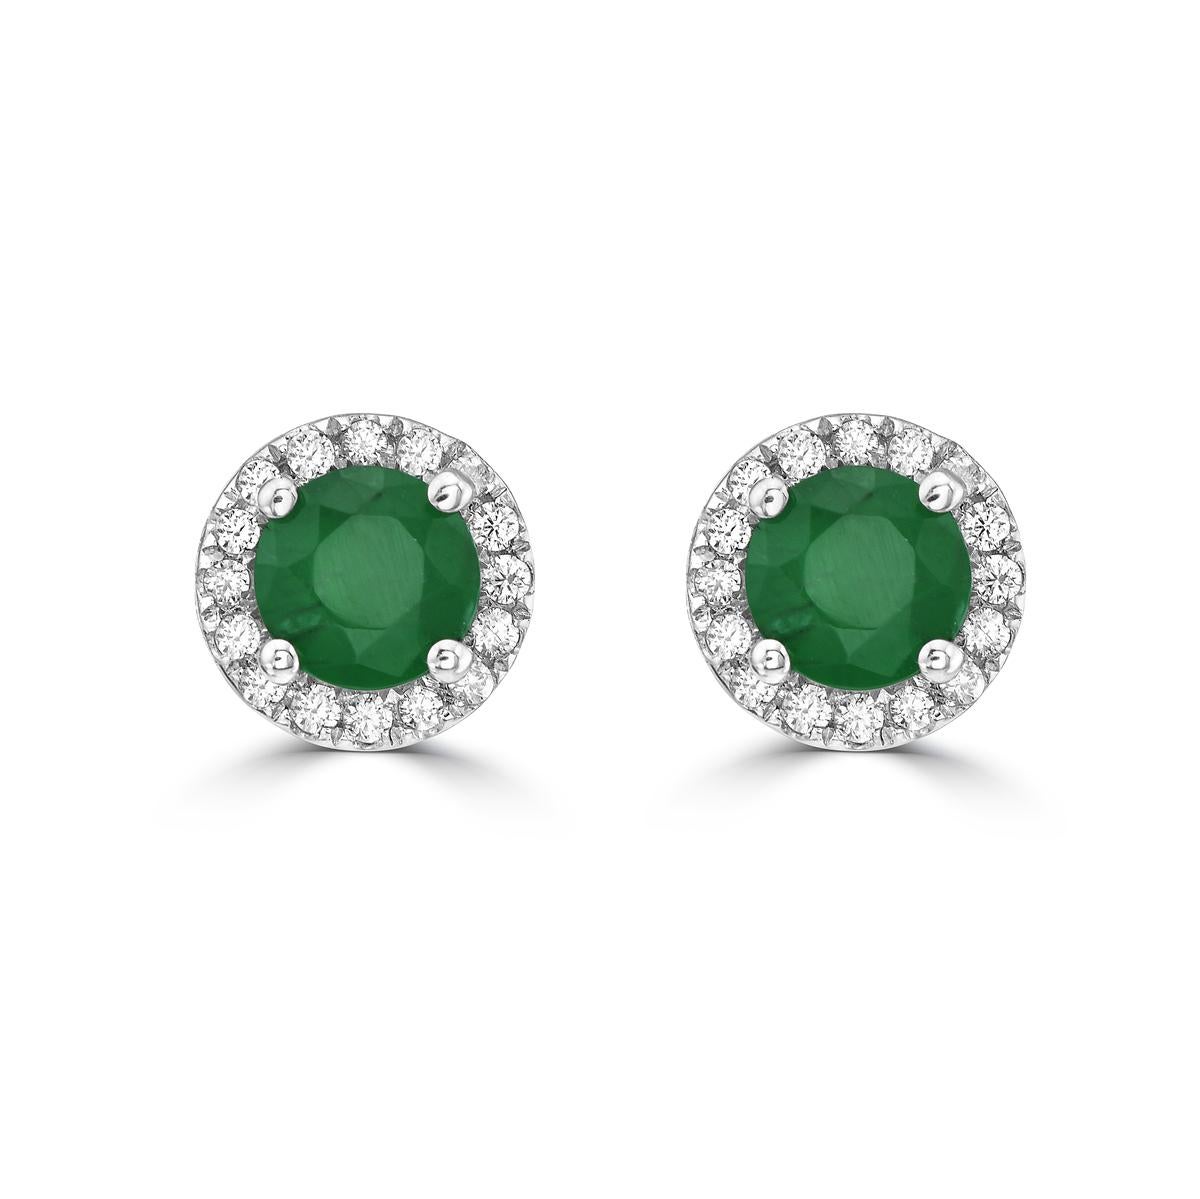 Elevate your look with our exquisite Emerald and Diamond Halo Martini Stud Earrings. The perfect blend of luxury and sophistication, these emerald stud earrings are crafted with stunning diamonds and lustrous gold for a truly exclusive feel. Add a